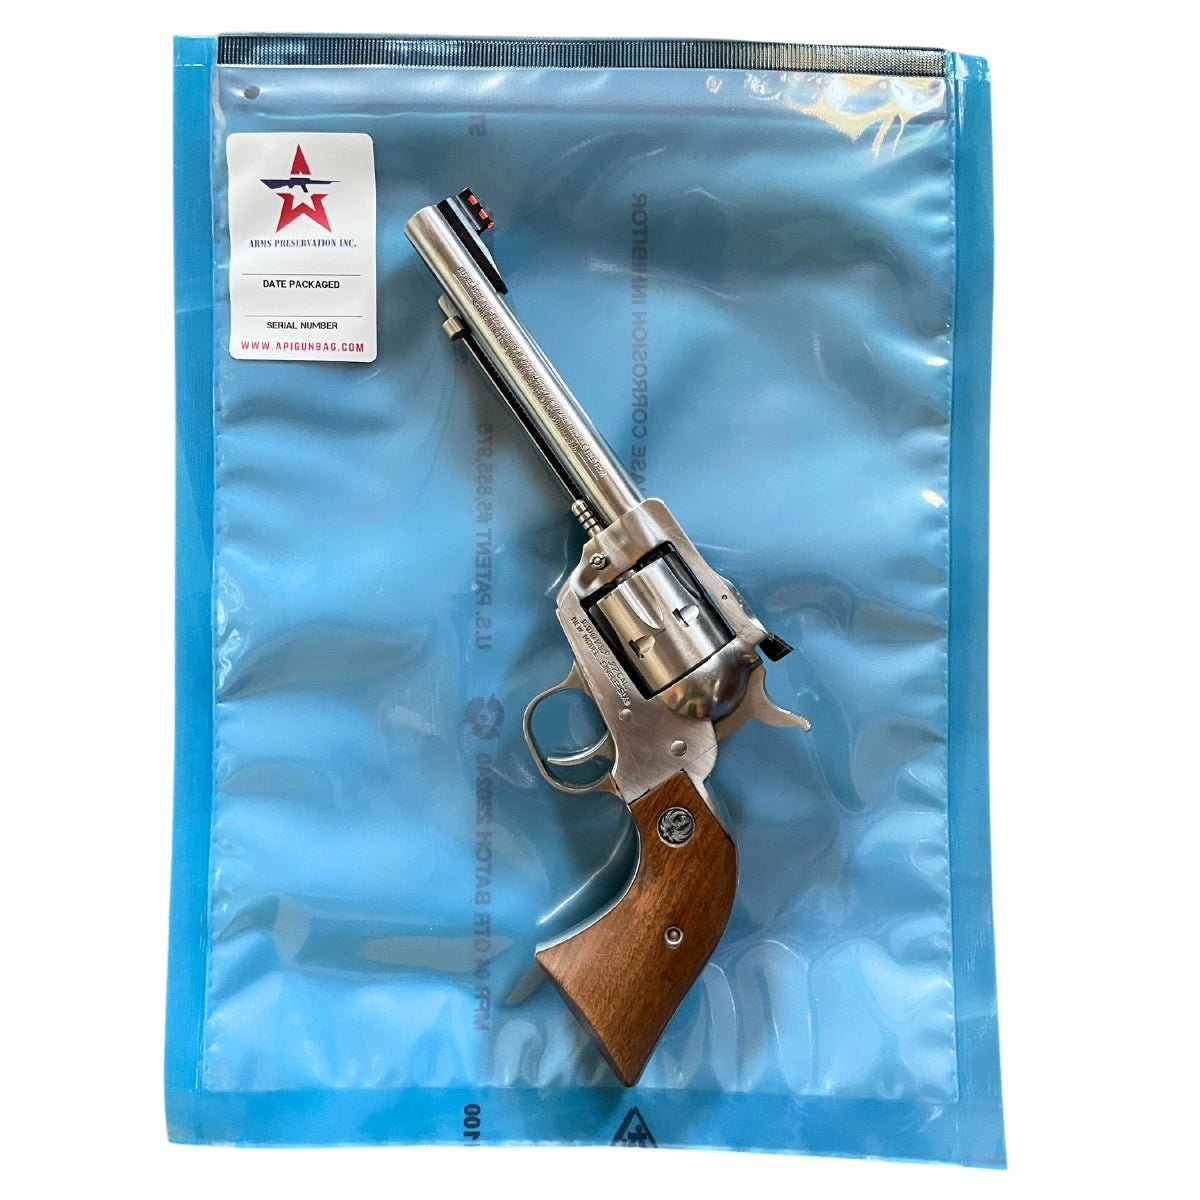 Benefits of VCI Firearm Storage Bags Over Other Gun Rust Prevention Methods - Arms Preservation Inc